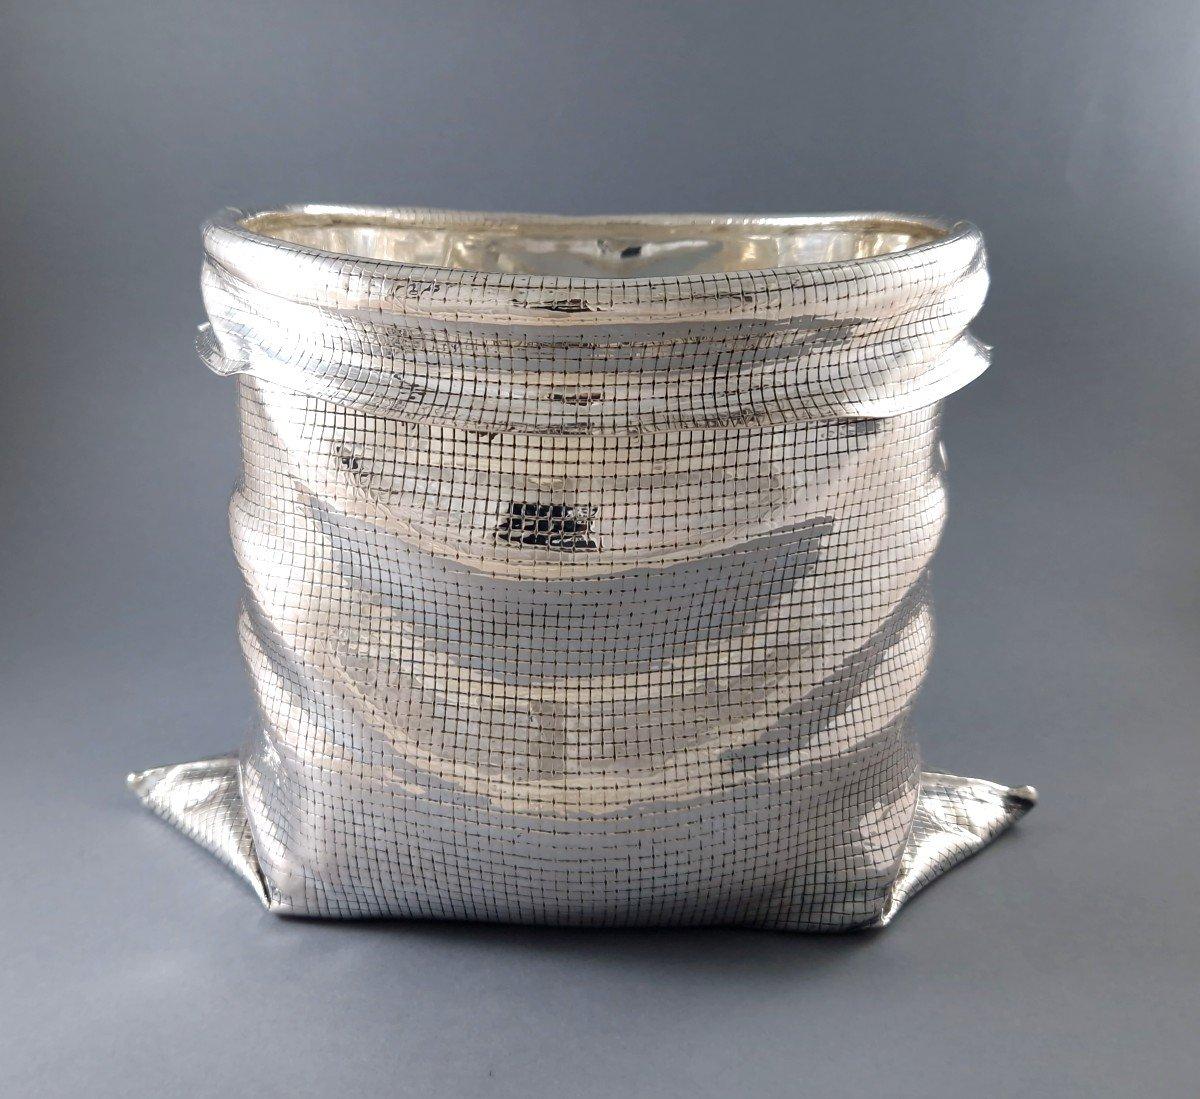 Beautiful champagne bucket in sterling silver imitating a bag 
Italian work around 1970 by Vavassori 
800 Silver hallmark 
Height: 17.2 cm 
Length at the base: 26.2 cm 
Width: 17 cm 
Weight: 1038 grams